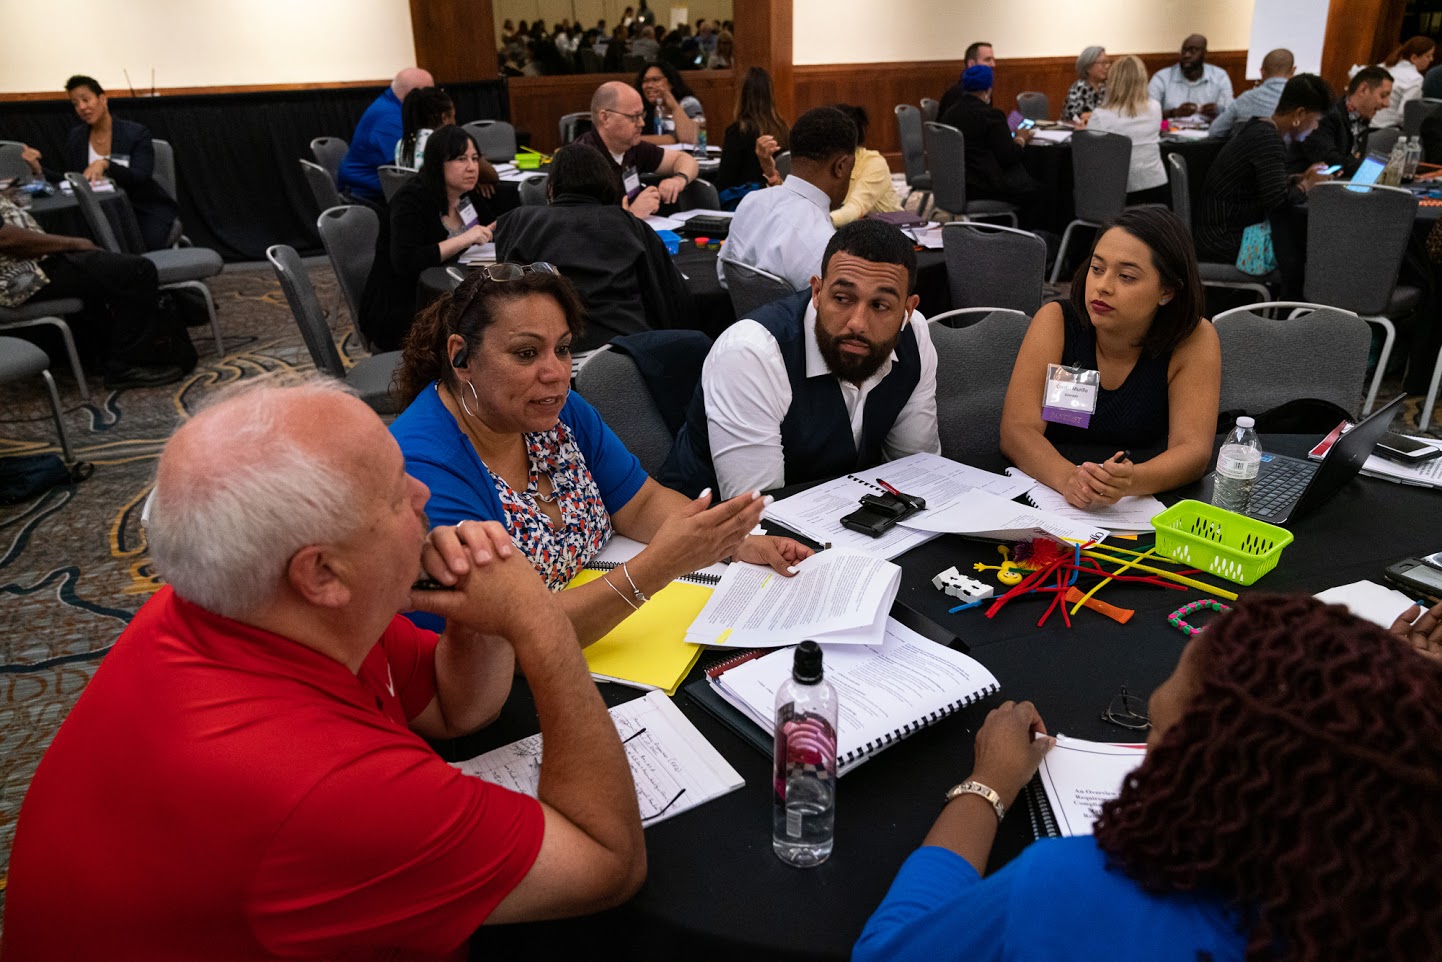 Breakout sessions allowed attendees to network and learn from each other. 